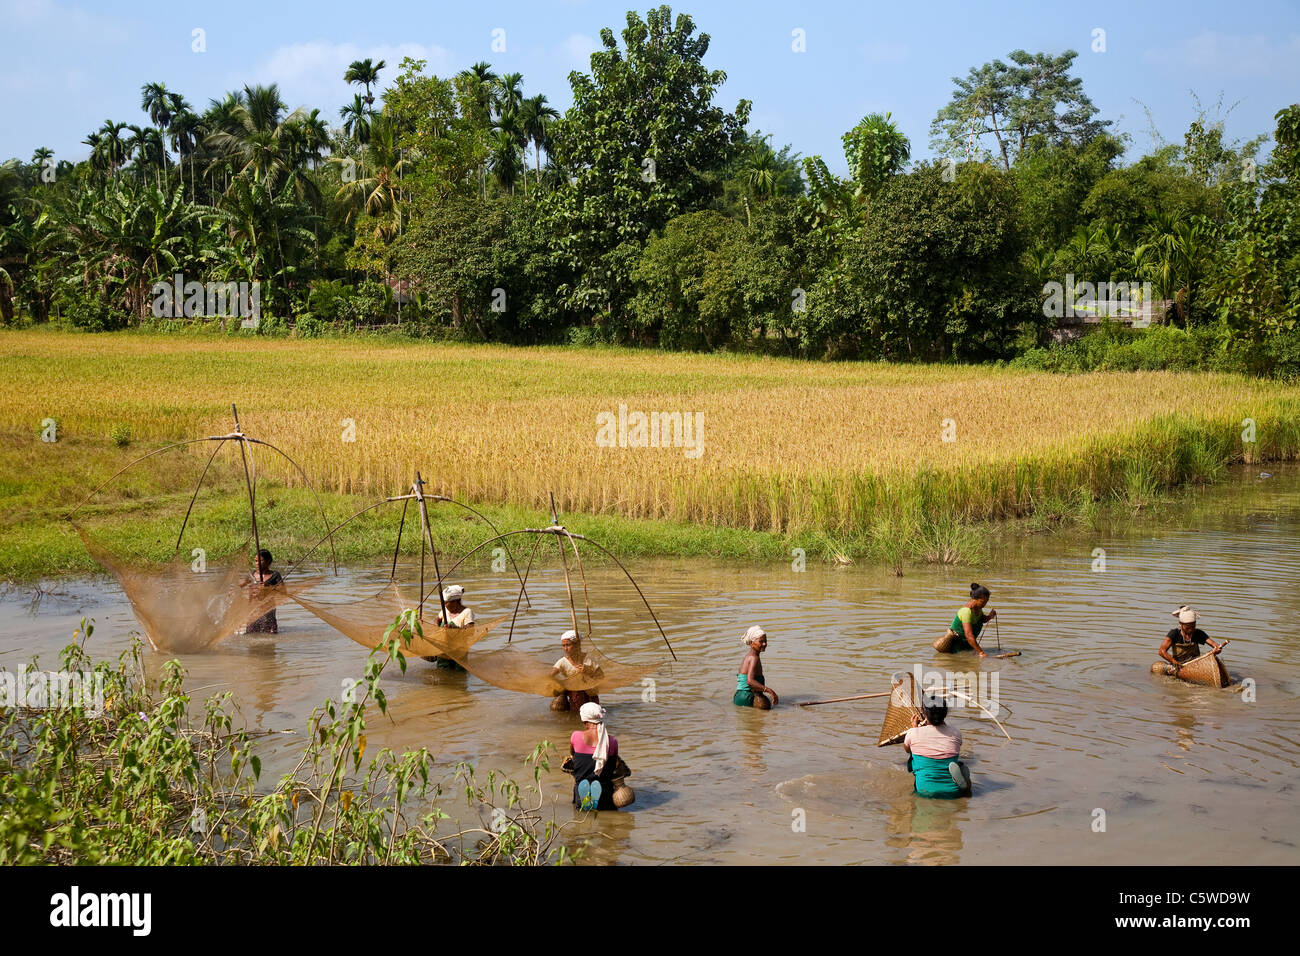 Local Assamese women catch fish in shallow muddy water in traditional style. Assam, Northeast India. Stock Photo